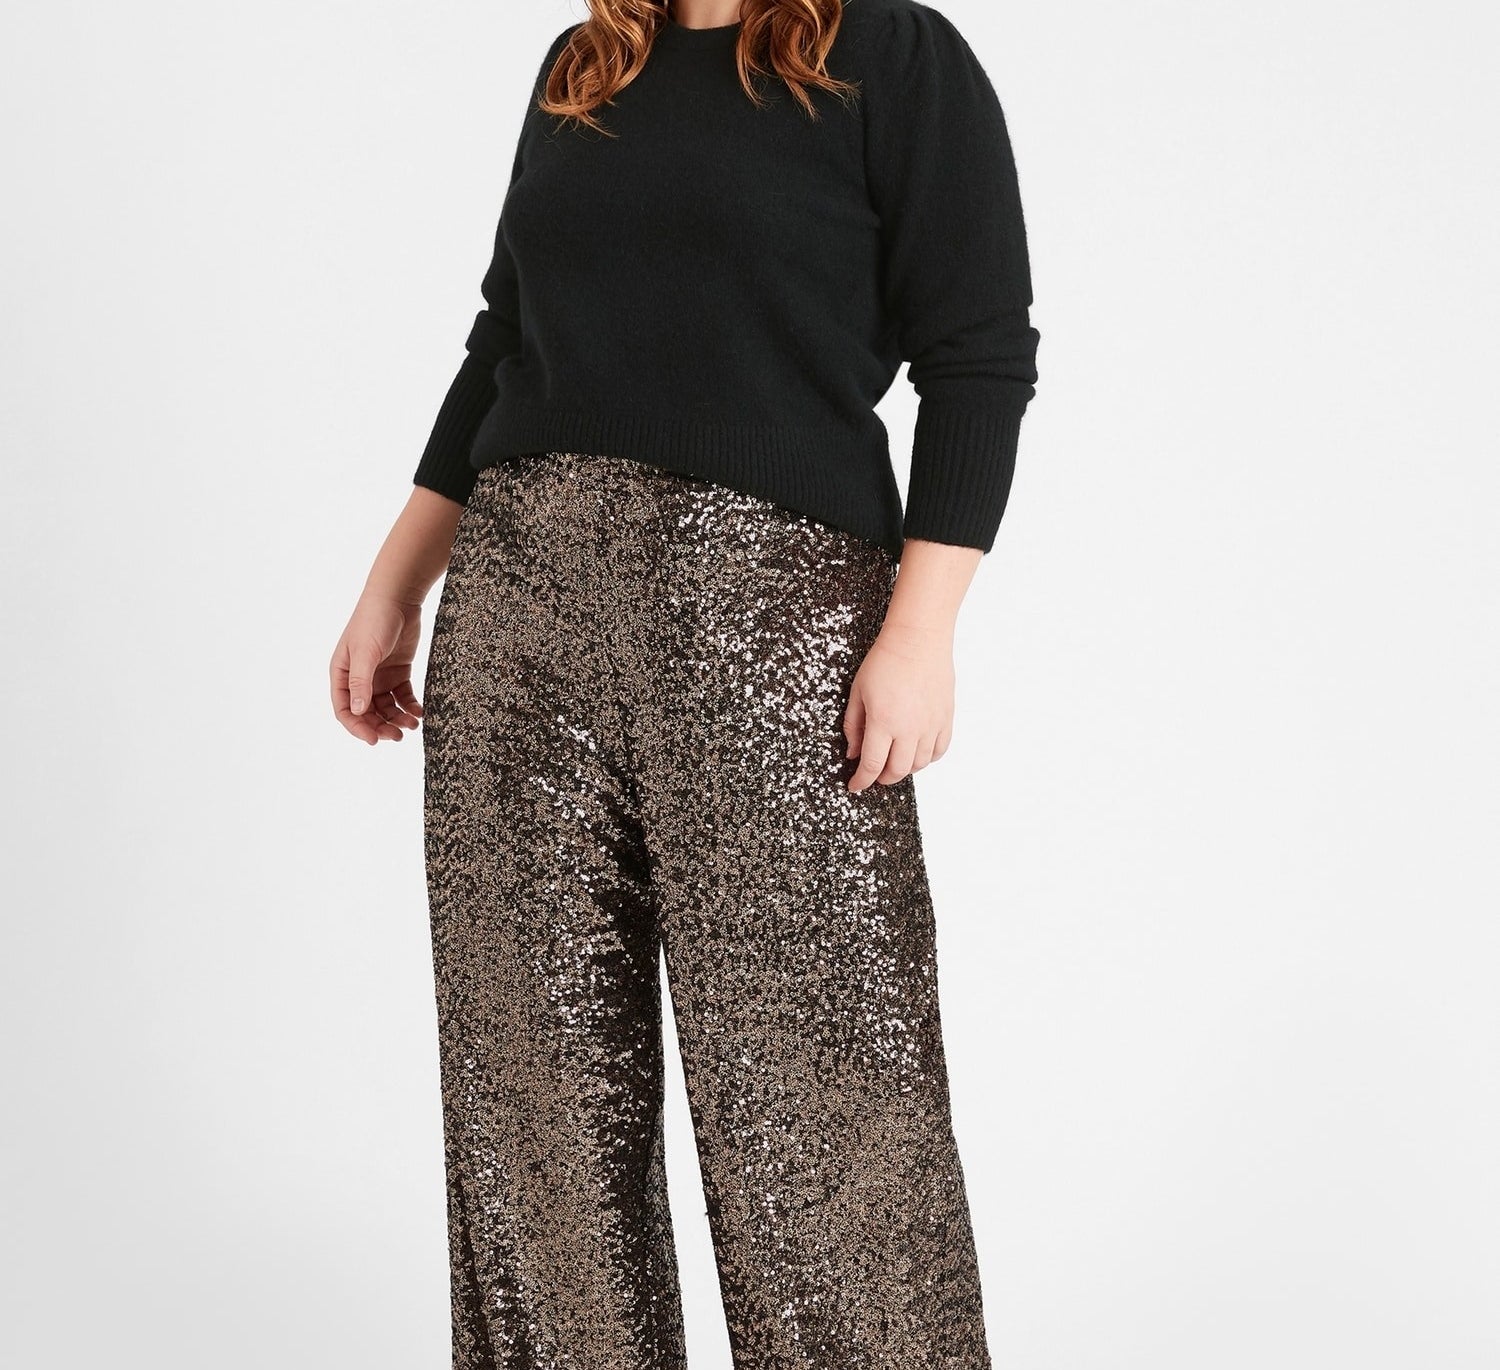 A person wearing the high-rise sequin pants 